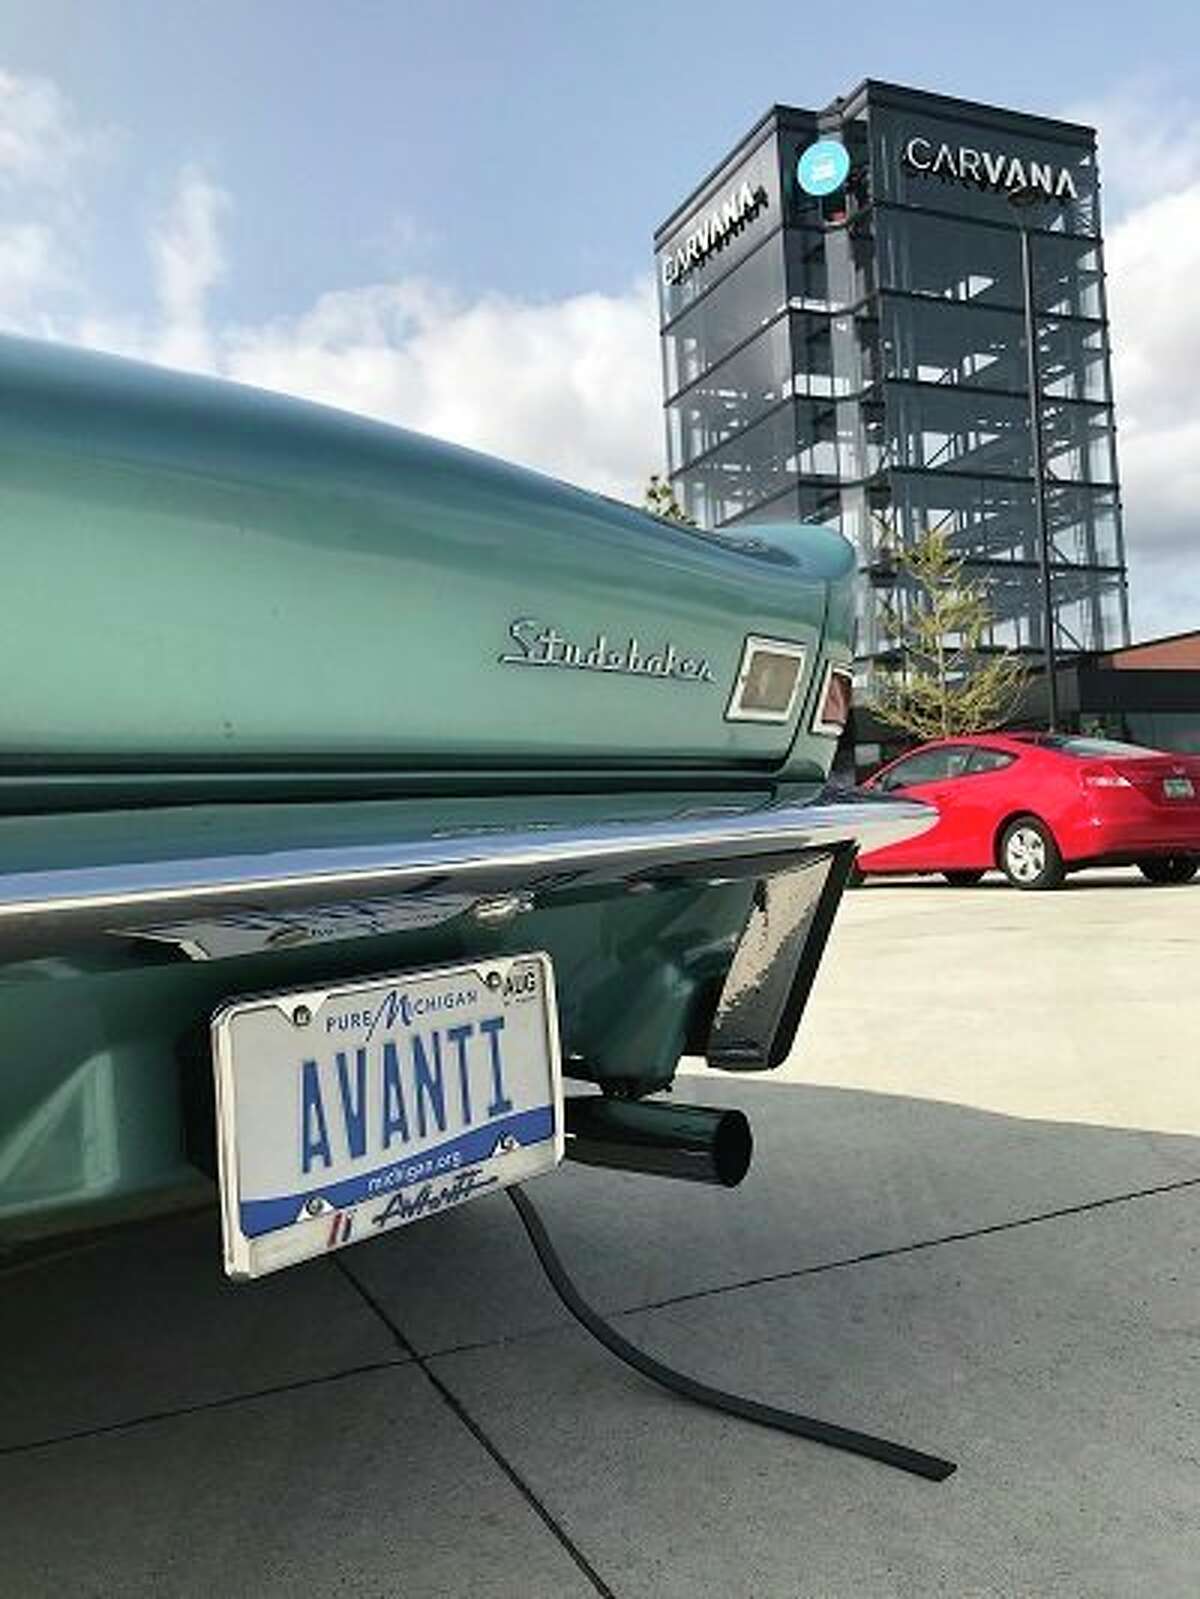 William Krueger took a series of pictures of classic cars during a recent trip to the Metro Detroit area. (Photo provided)